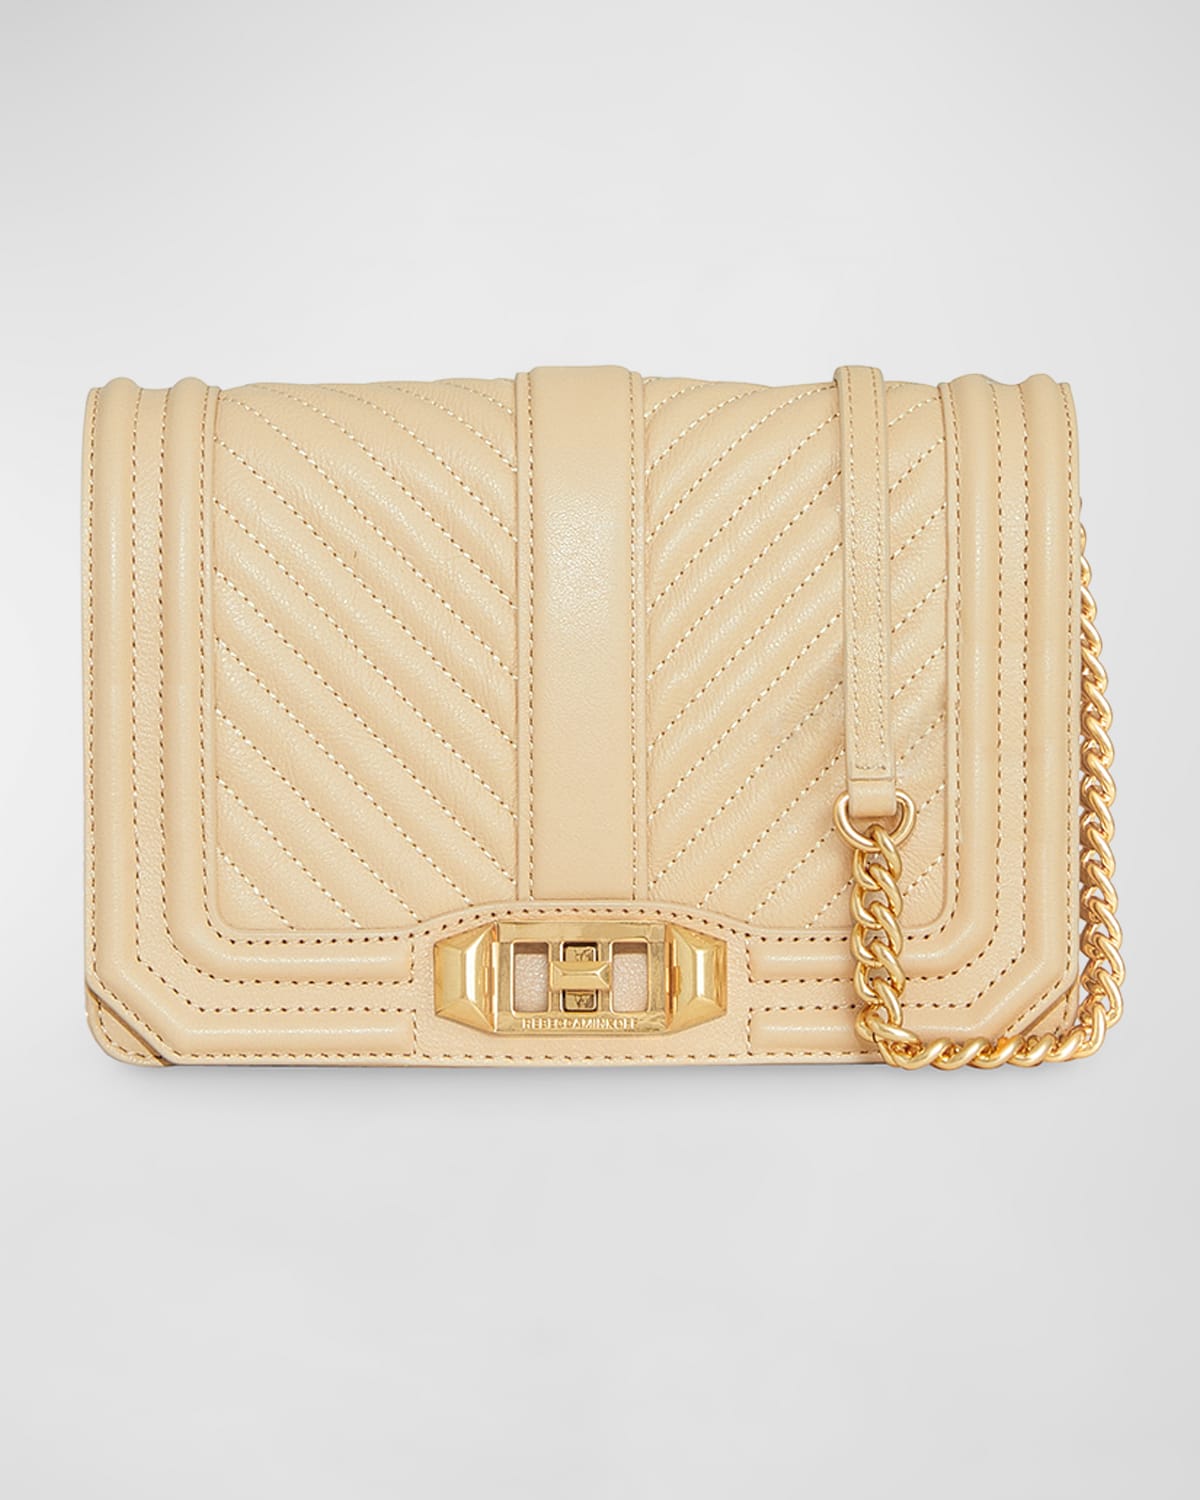 REBECCA MINKOFF SMALL QUILTED LEATHER CHAIN SHOULDER BAG